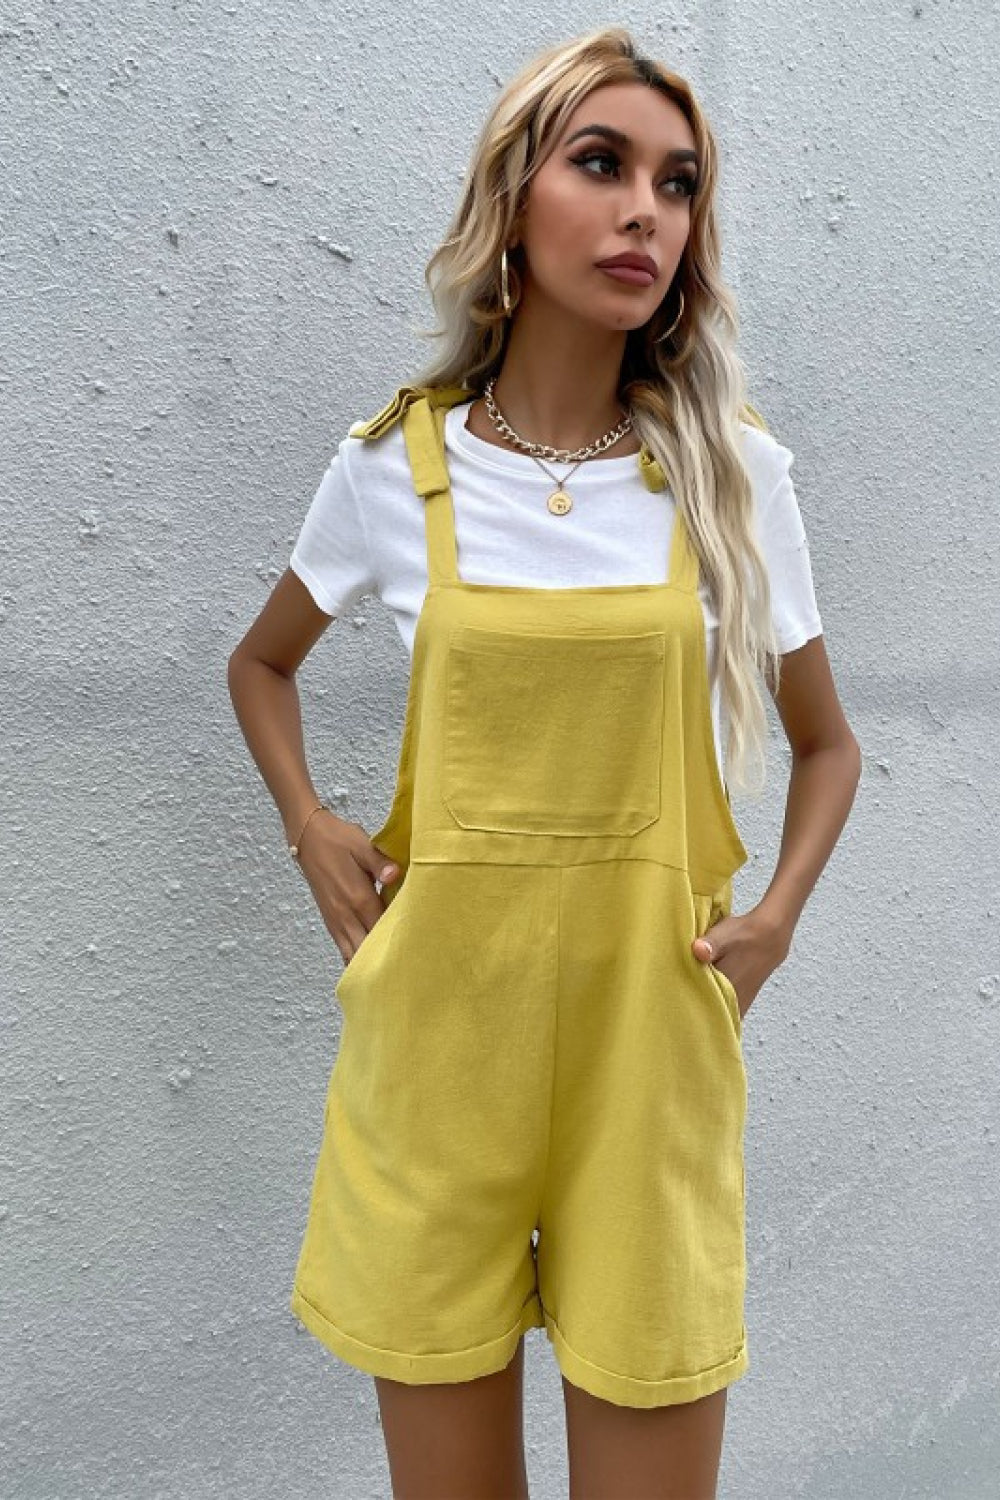 Tie Cuffed Short Overalls with Pockets - Yellow / S - Women’s Clothing & Accessories - Overalls - 1 - 2024